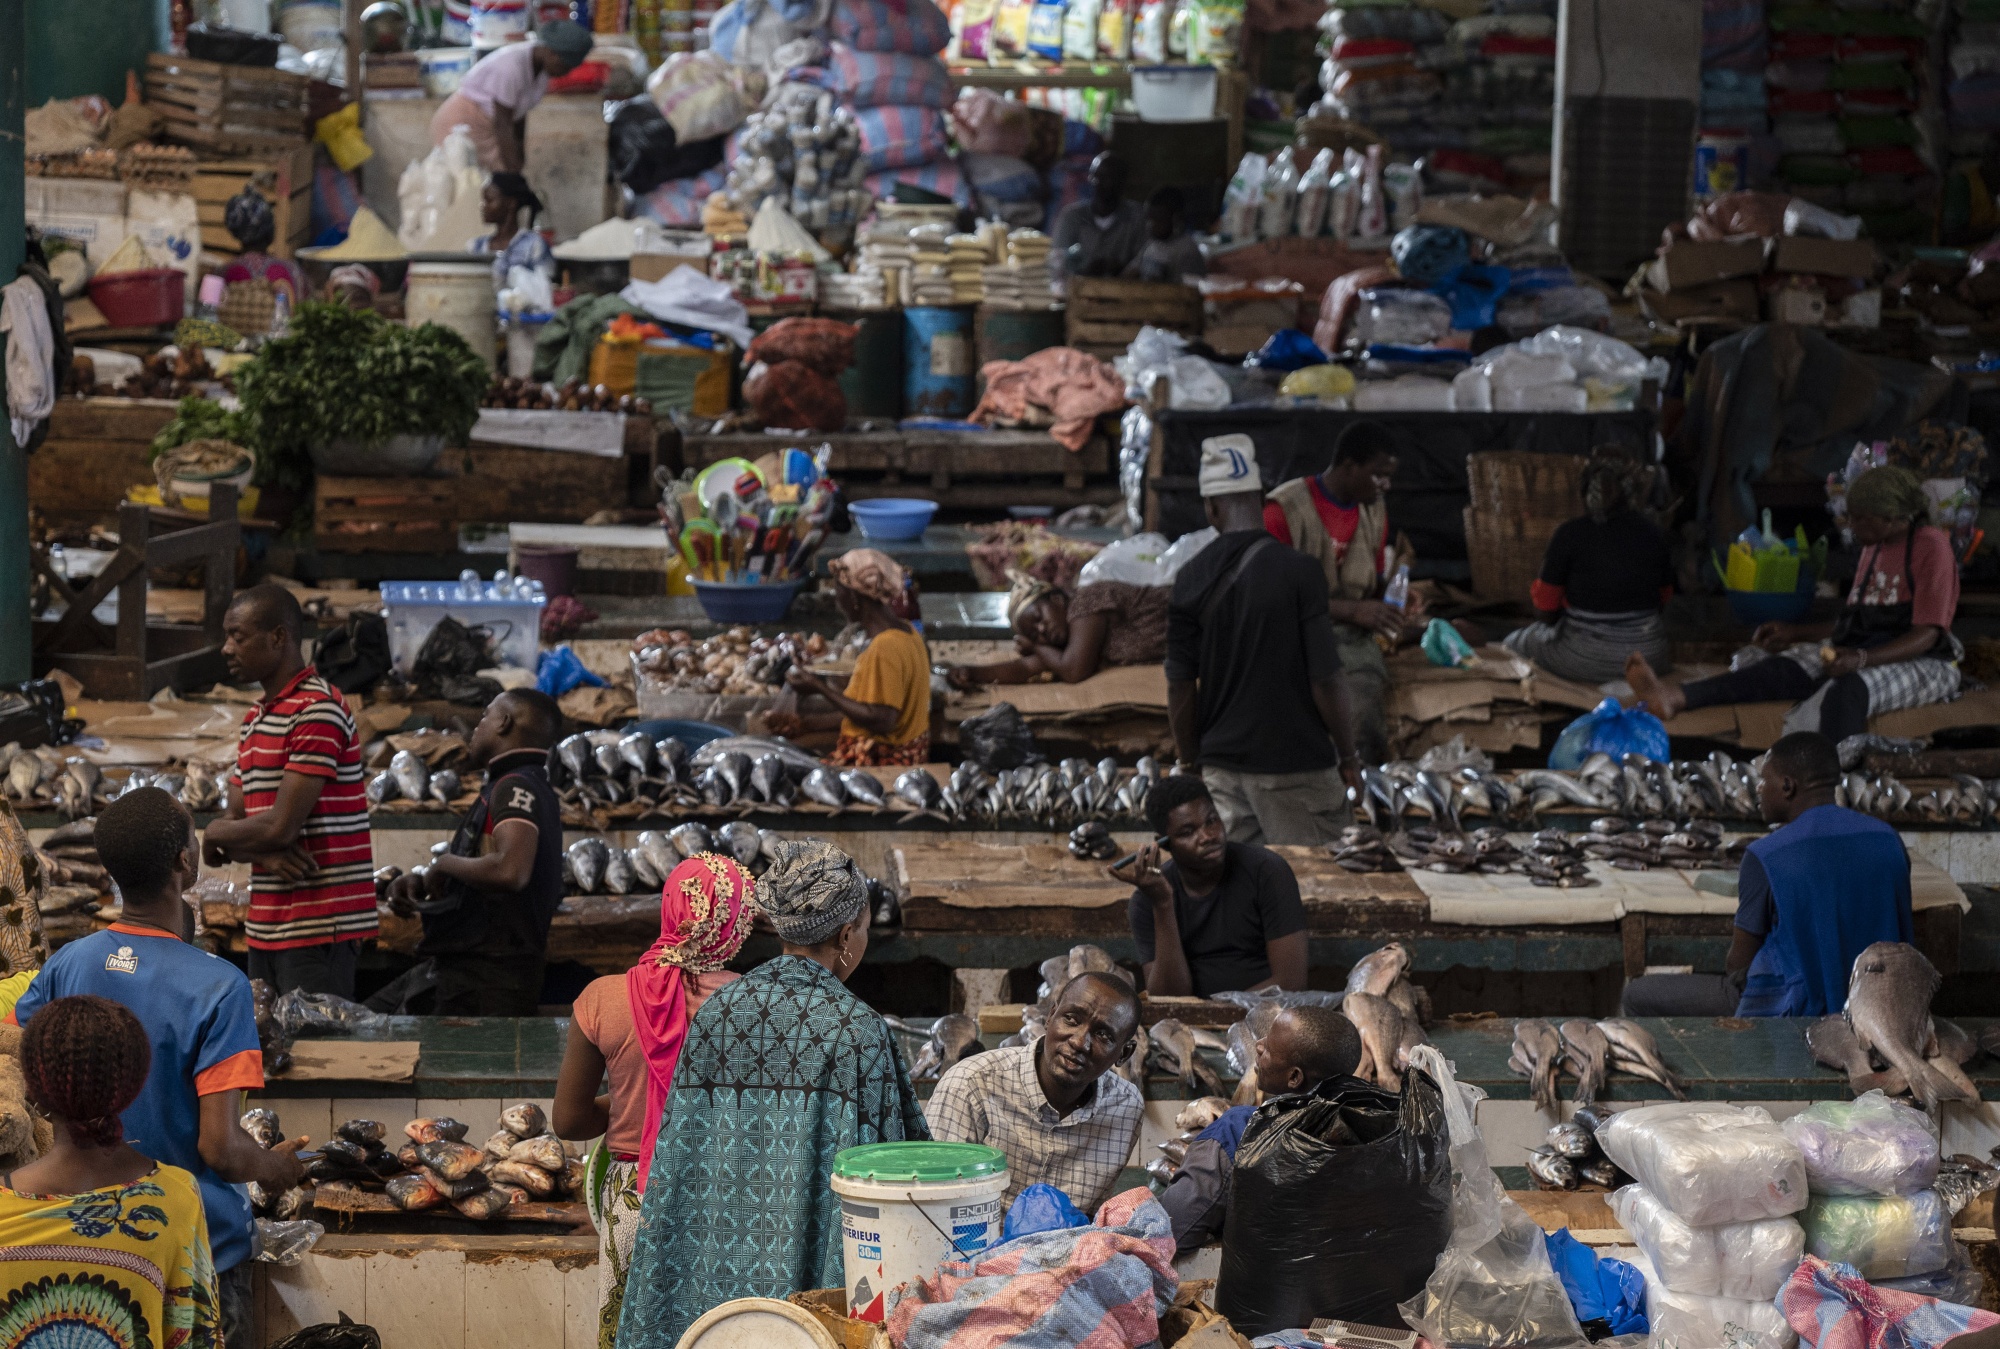 Vendors sell fresh food produce in the Adjame market in the Plateau district of Abidjan, Ivory Coast.